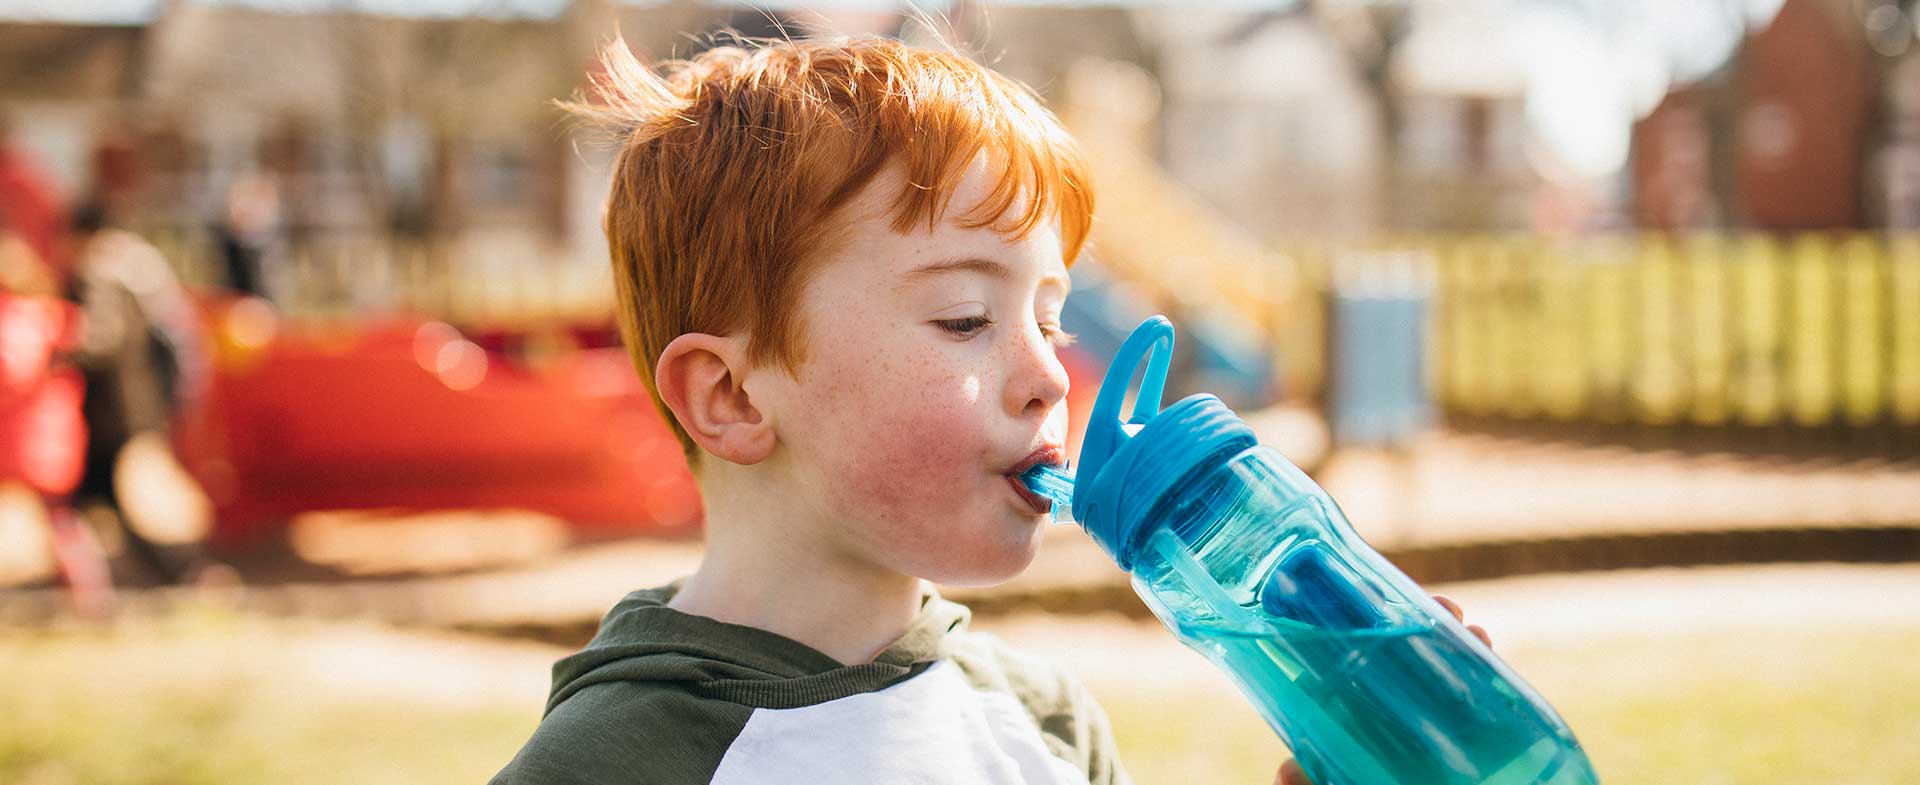 The Best Ways To Keep Kids Hydrated This Summer